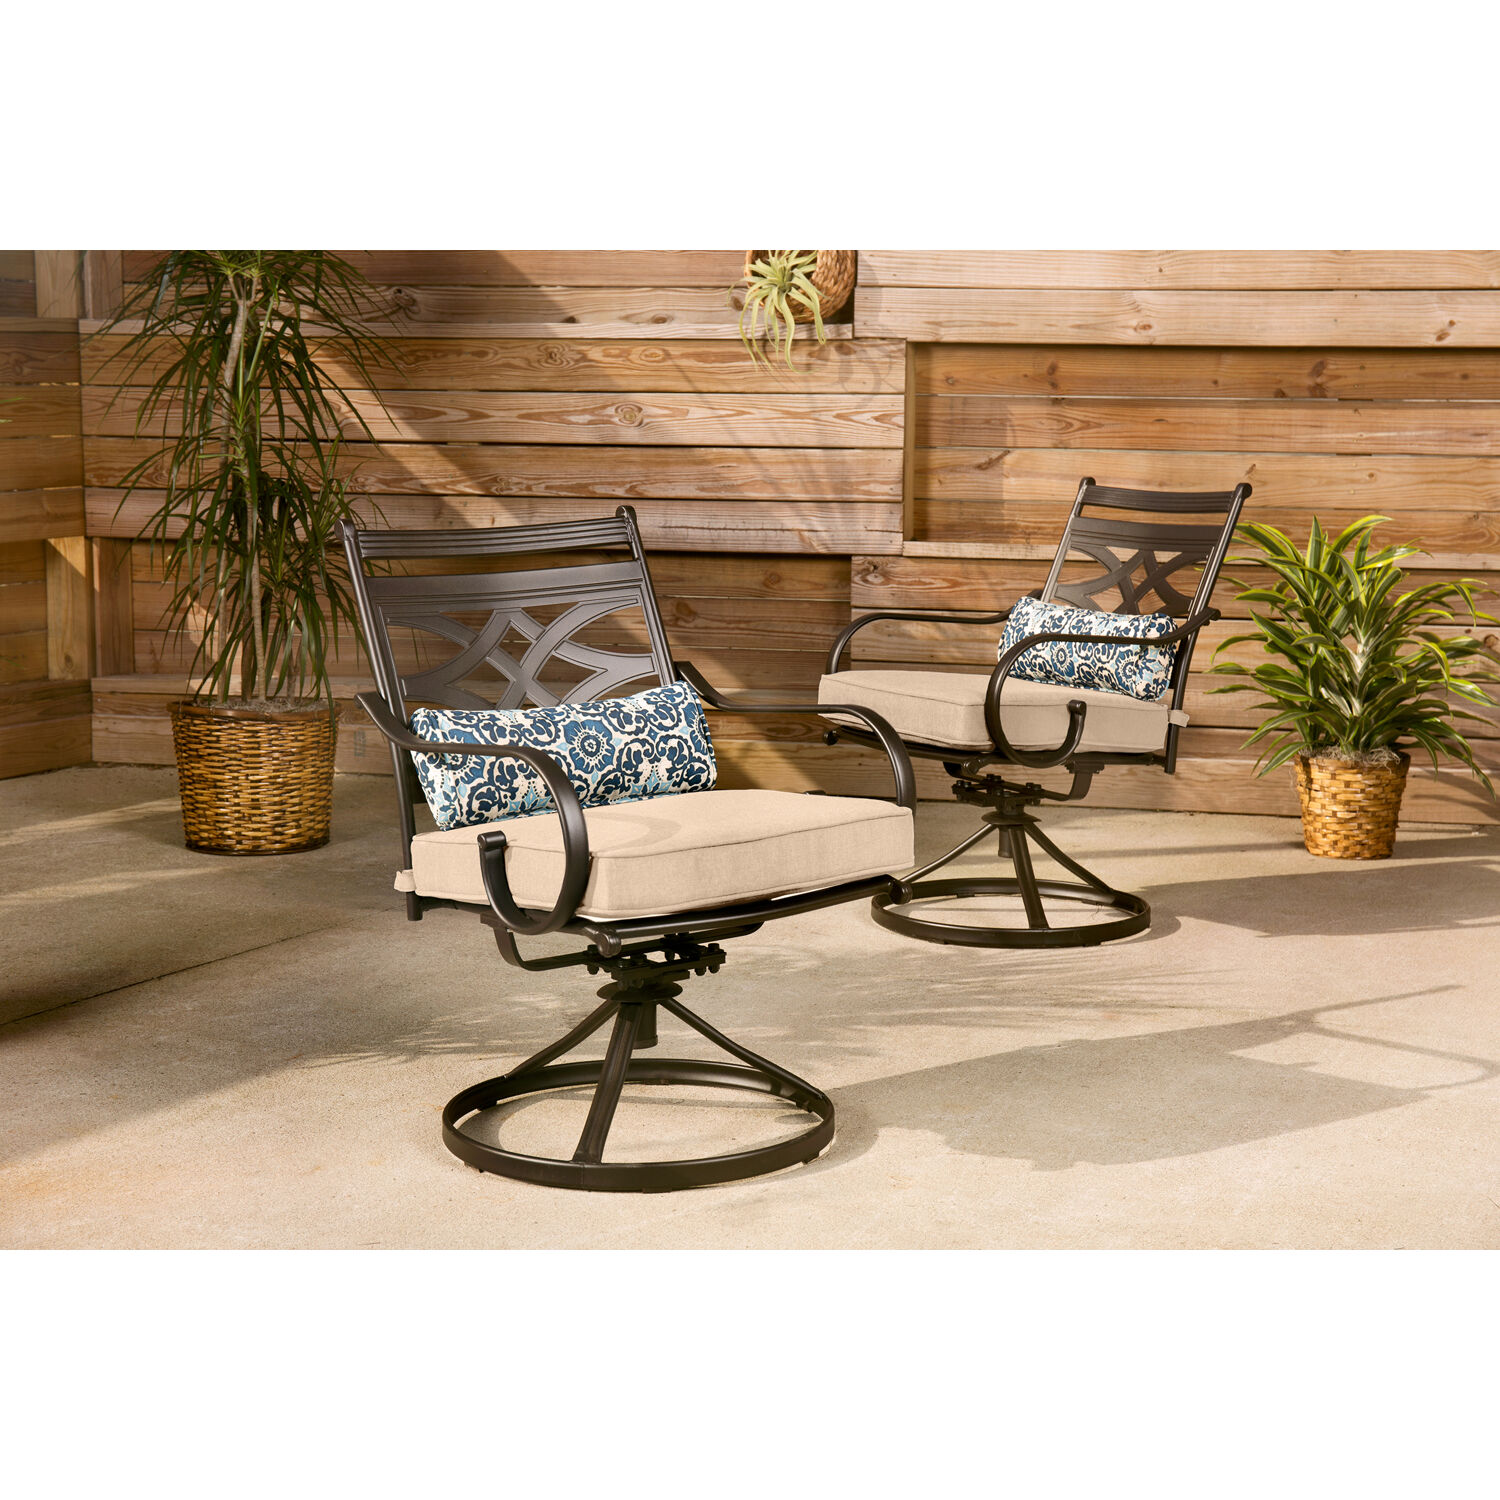 Hanover Montclair 5-Piece Steel Patio Dining Set in Tan with 4 Swivel Rockers and a Square Table - image 4 of 12